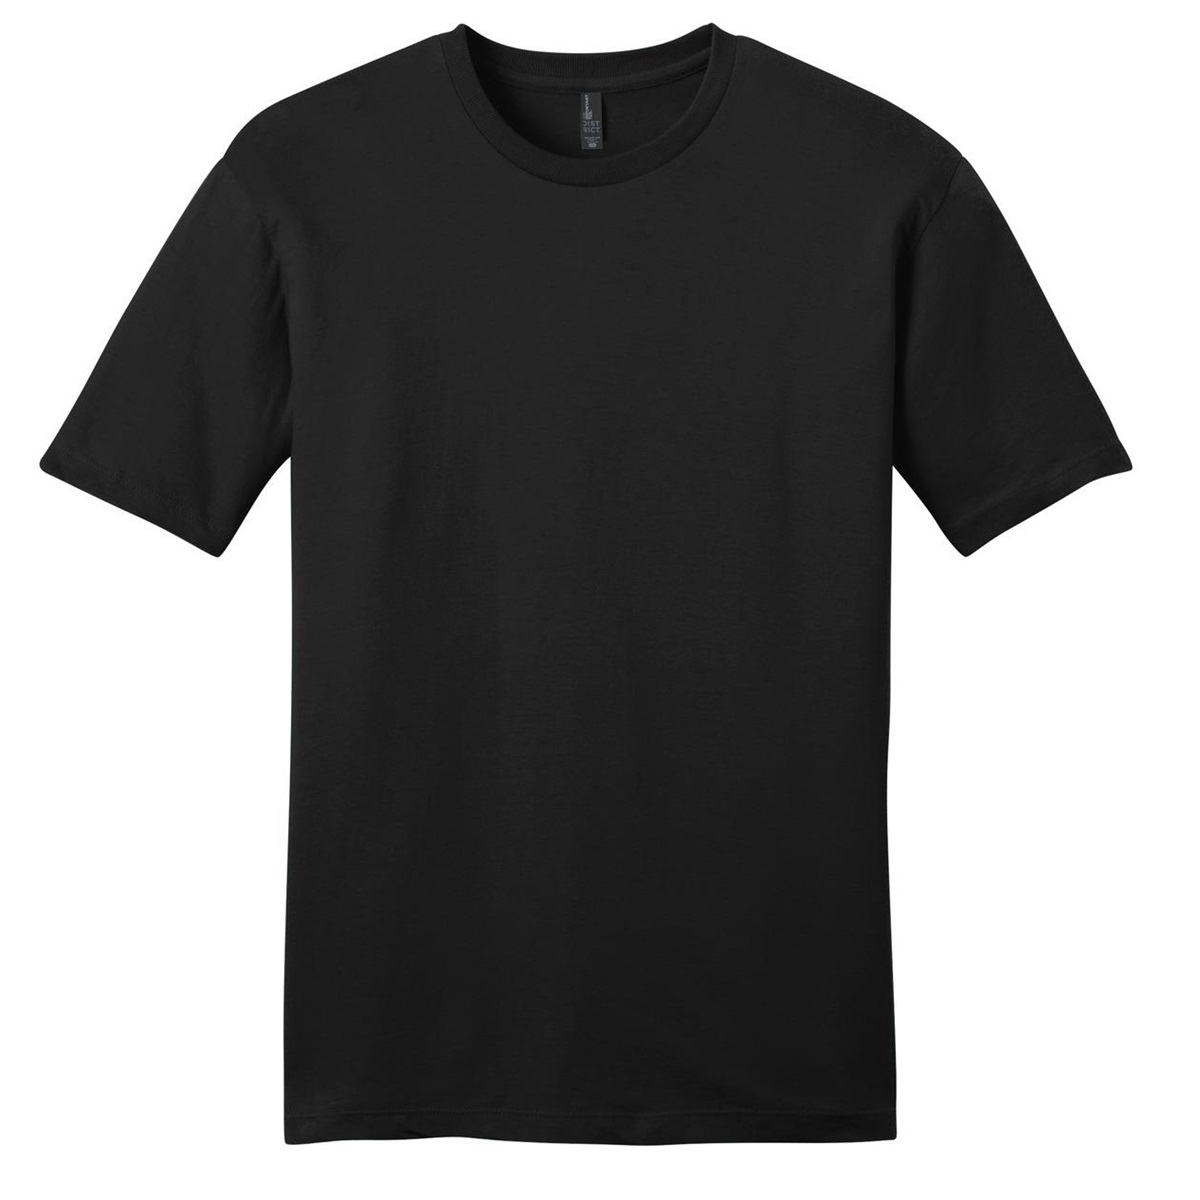 District DT6000 Young Mens Very Important Tee - Black | FullSource.com